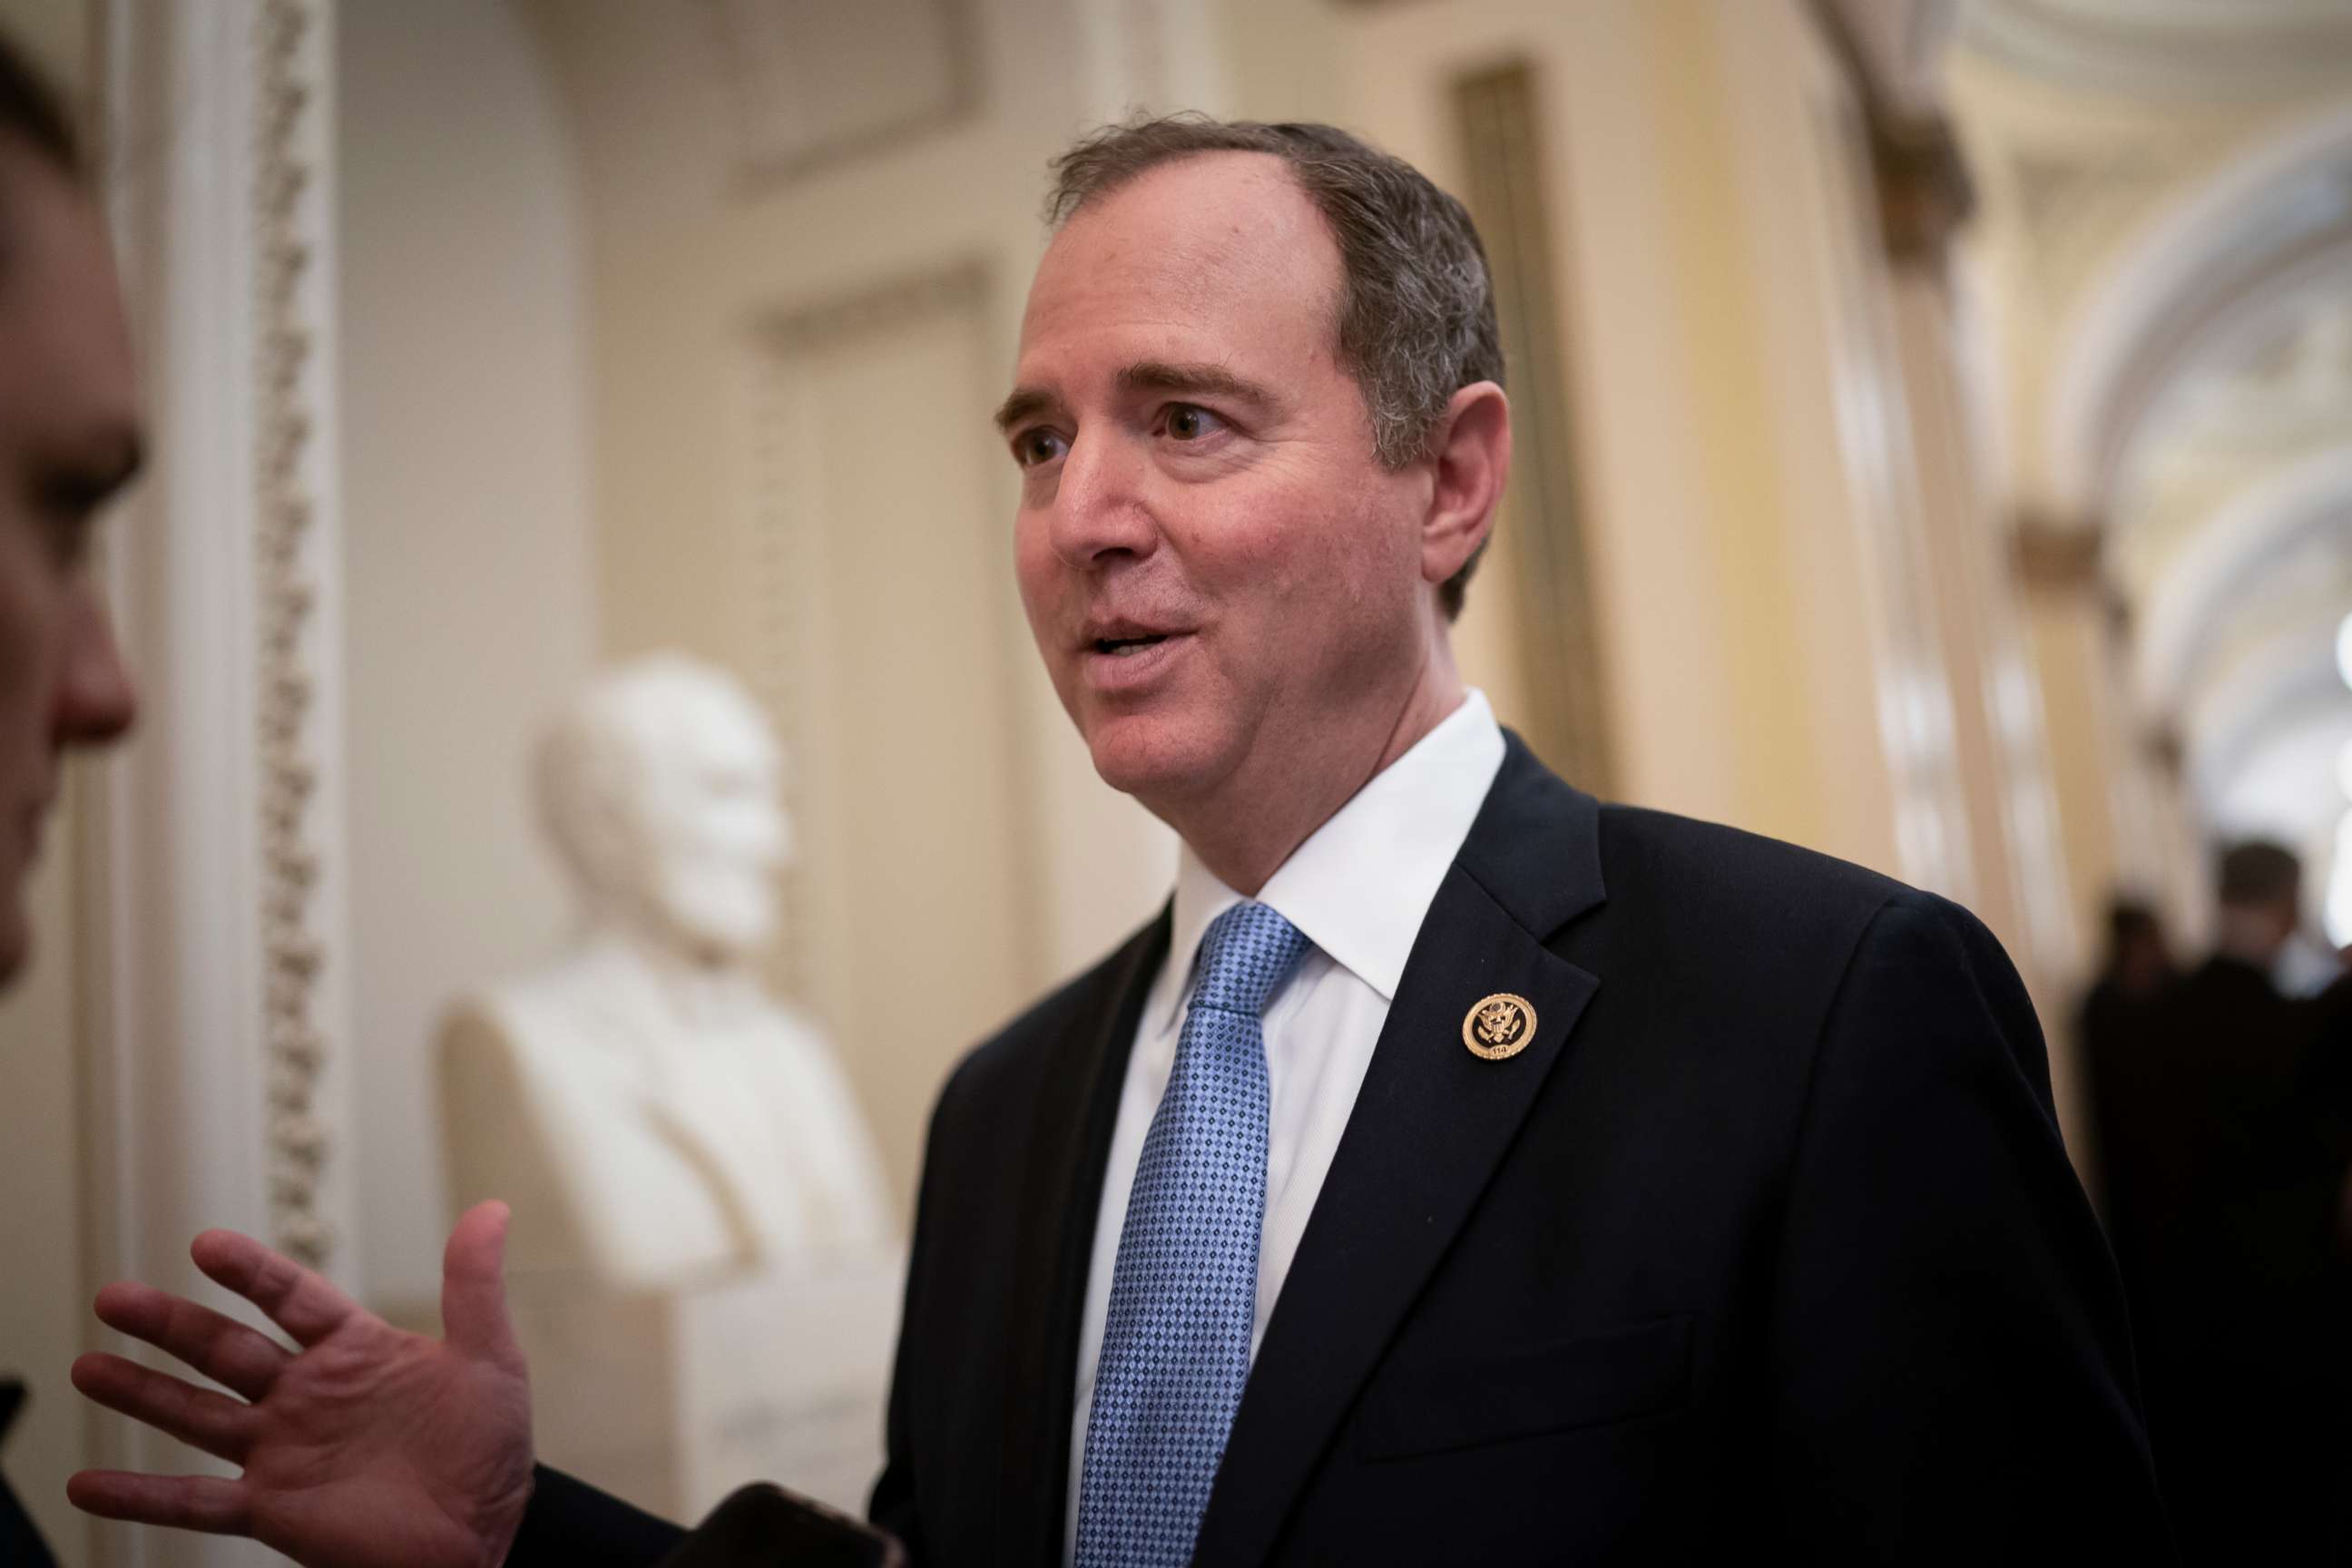 PHOTO: In this Tuesday, March 3, 2020, file photo, House Intelligence Committee Chairman Adam Schiff, D-Calif., talks to reporters as lawmakers work to extend government surveillance powers that are expiring soon, on Capitol Hill in Washington.